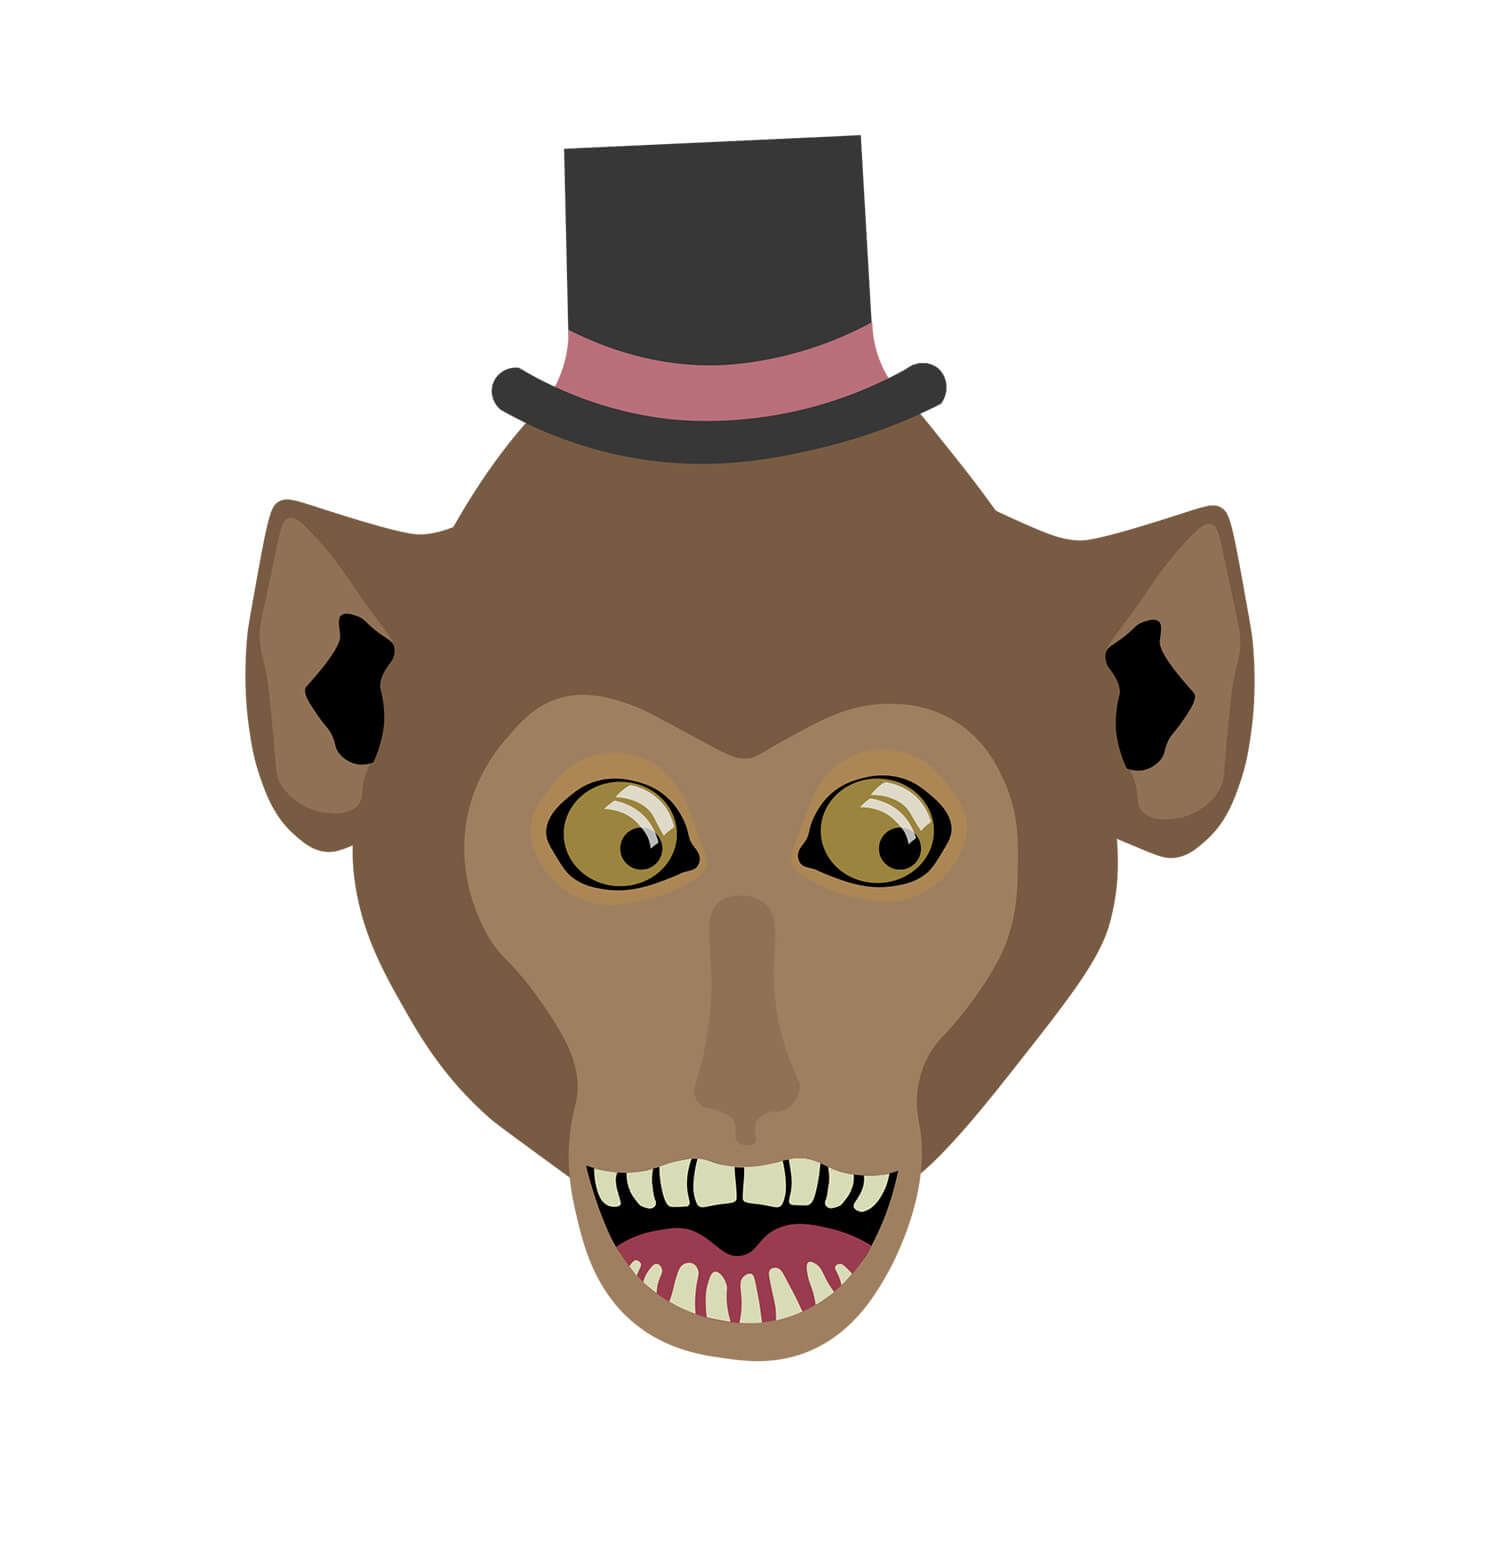 Illustrated monkey with a black hat